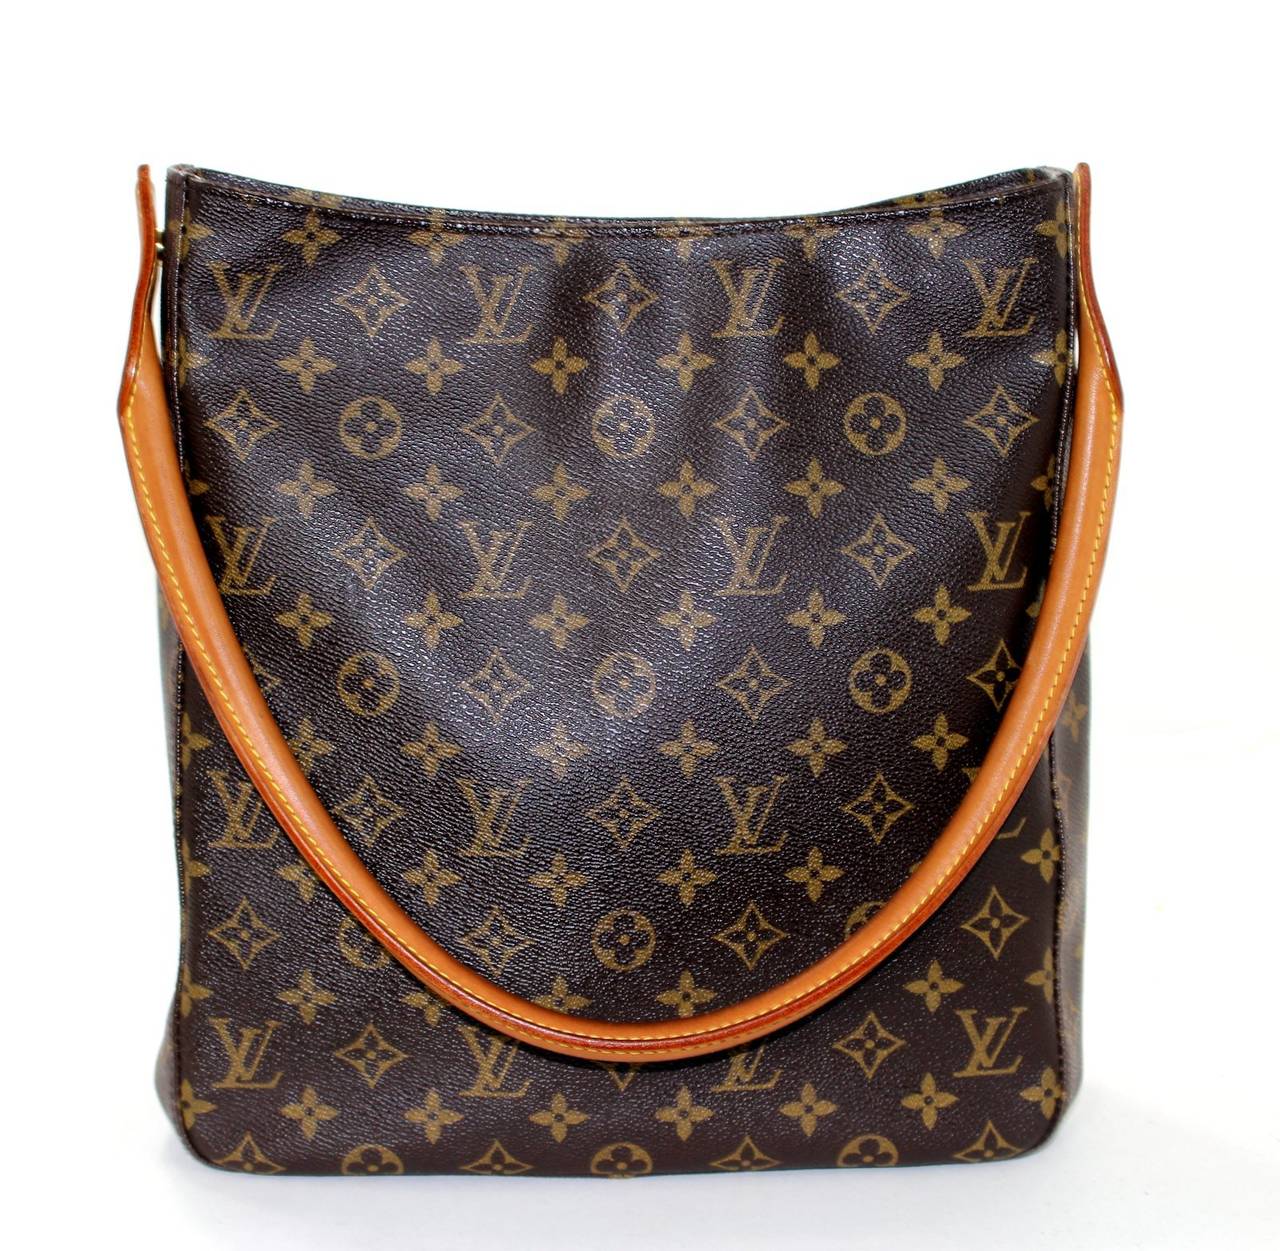 In excellent condition, this classic GM Looping Shoulder Bag from Louis Vuitton is a brilliant find.  The exterior canvas looks first-rate and the interior is extremely clean.  There is some light scratching on the handle from normal use.  This is